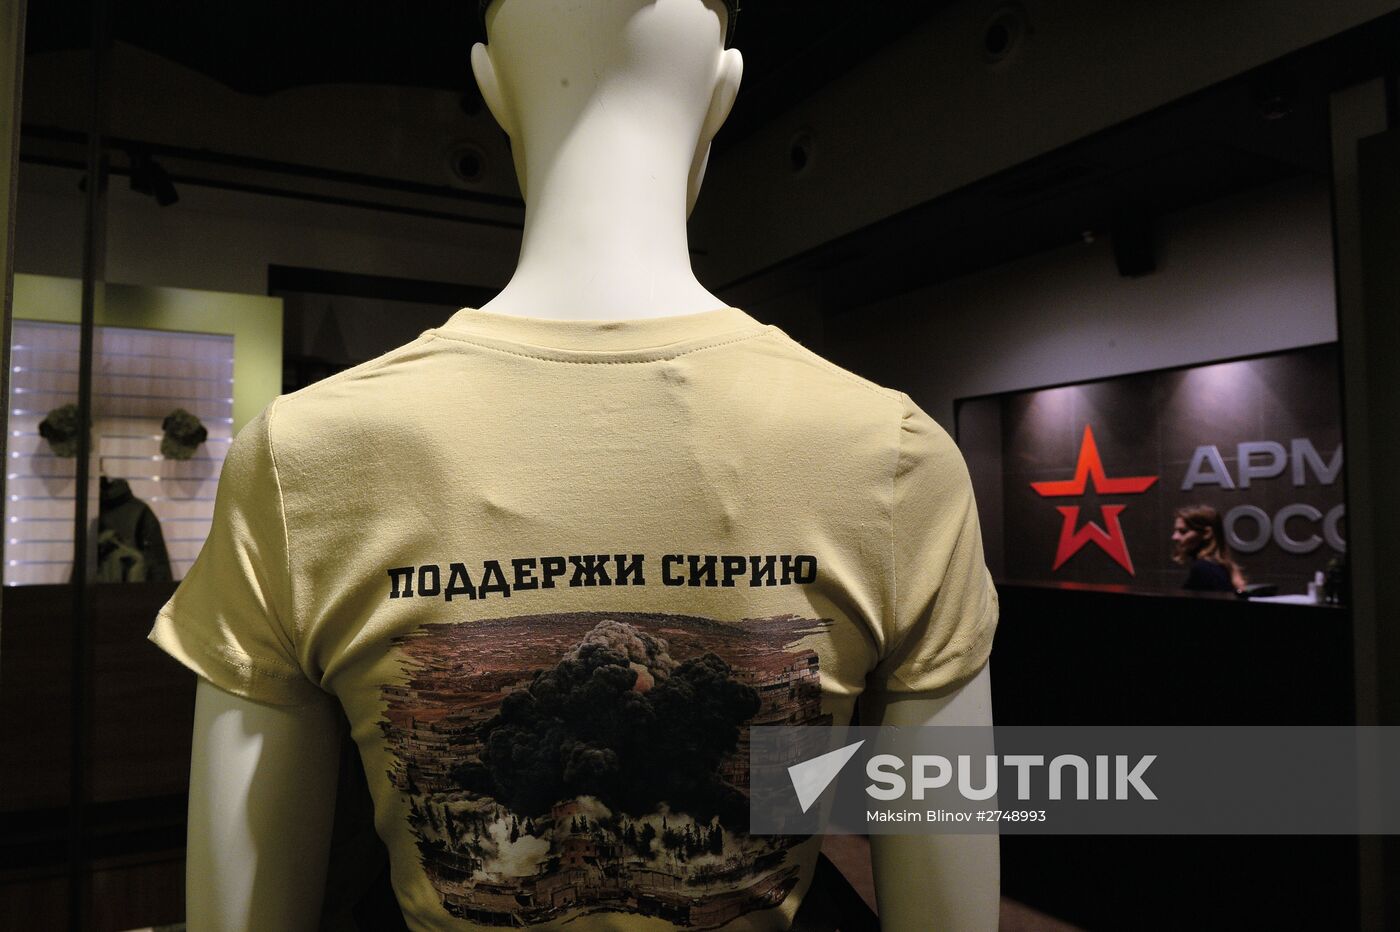 T-shirts in support of Russian military operation in Syria